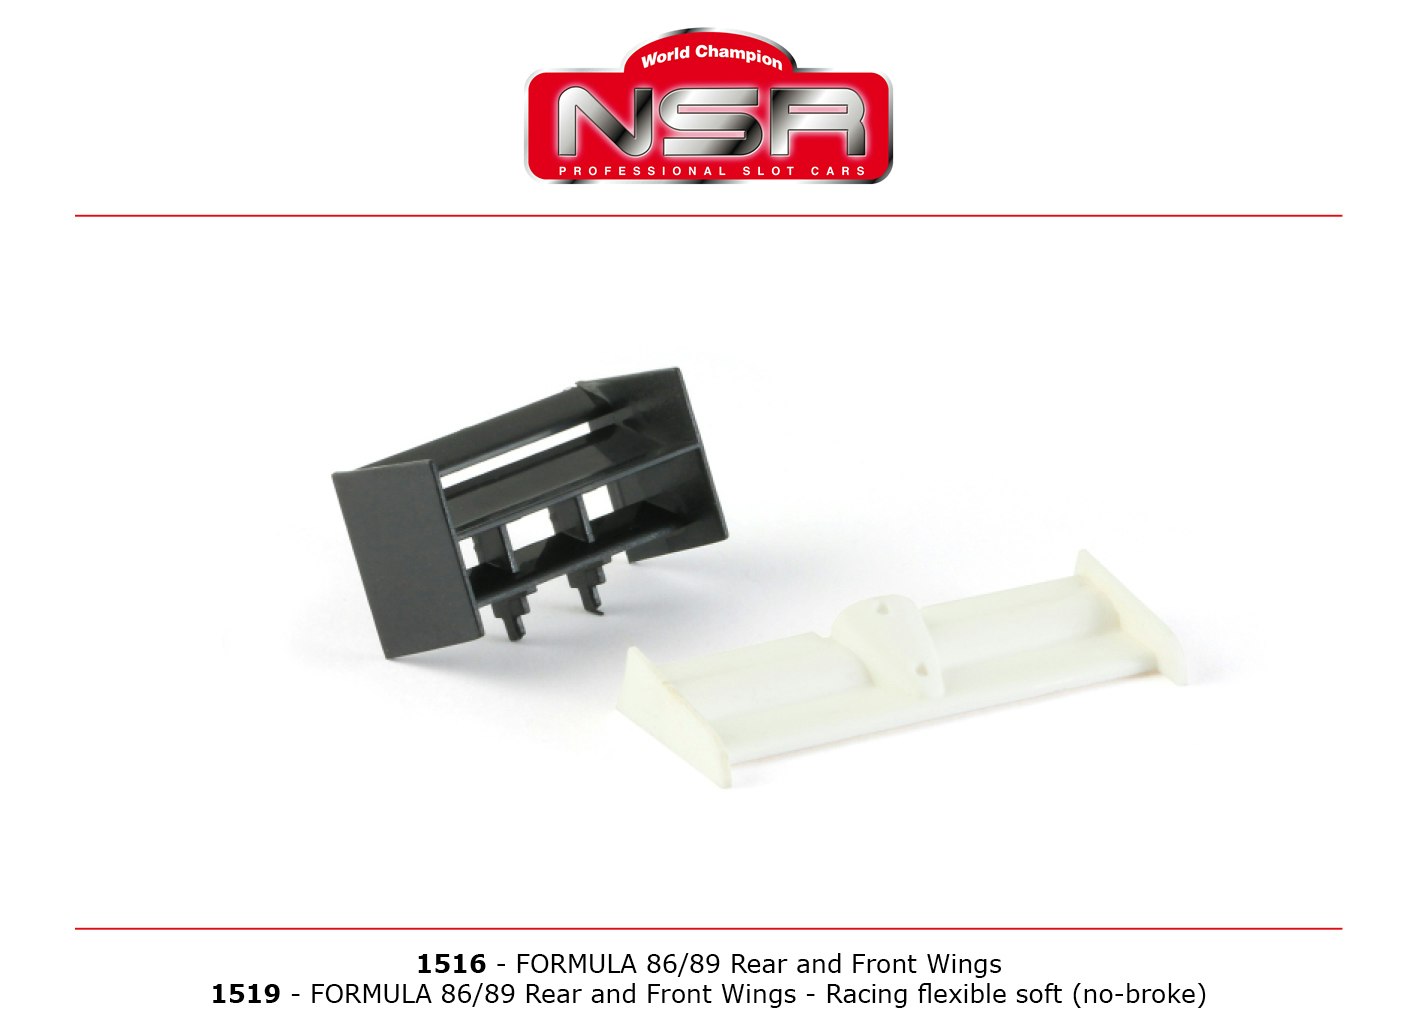 NSR - REAR AND FRONT WING - Racing Flexible Soft Material (For Formula NSR)